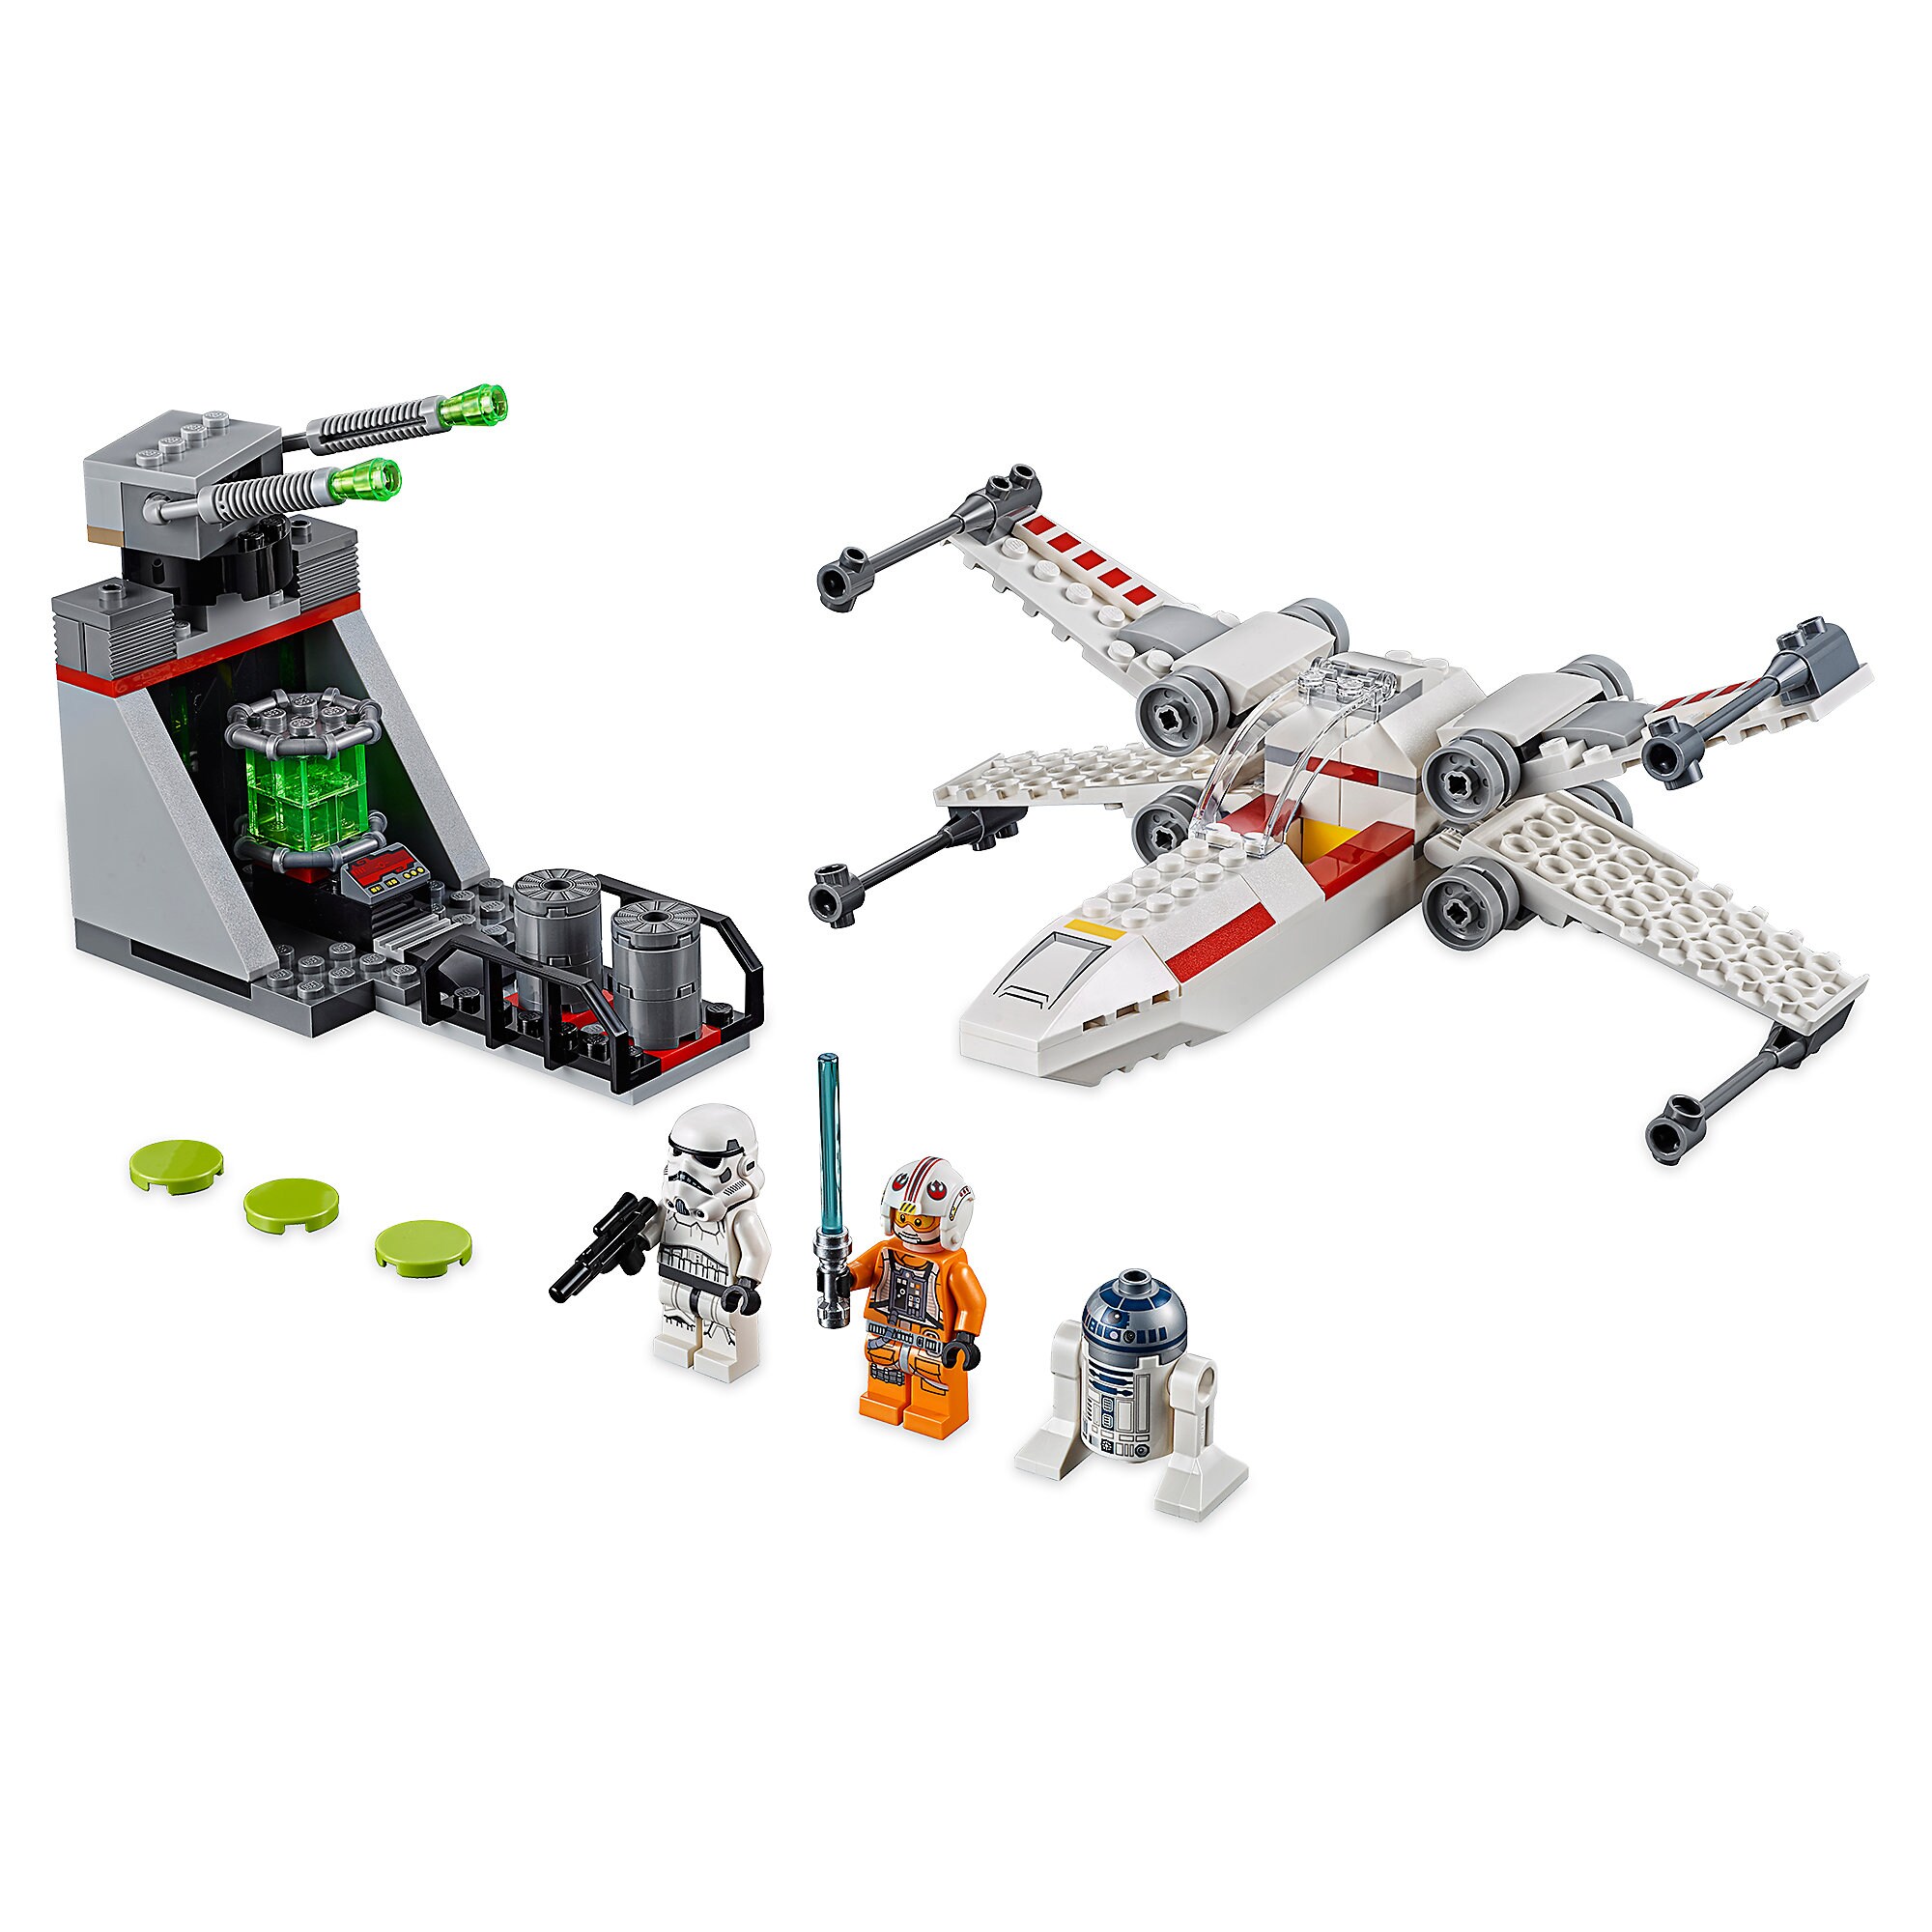 X-Wing Starfighter Trench Run Playset by LEGO - Star Wars